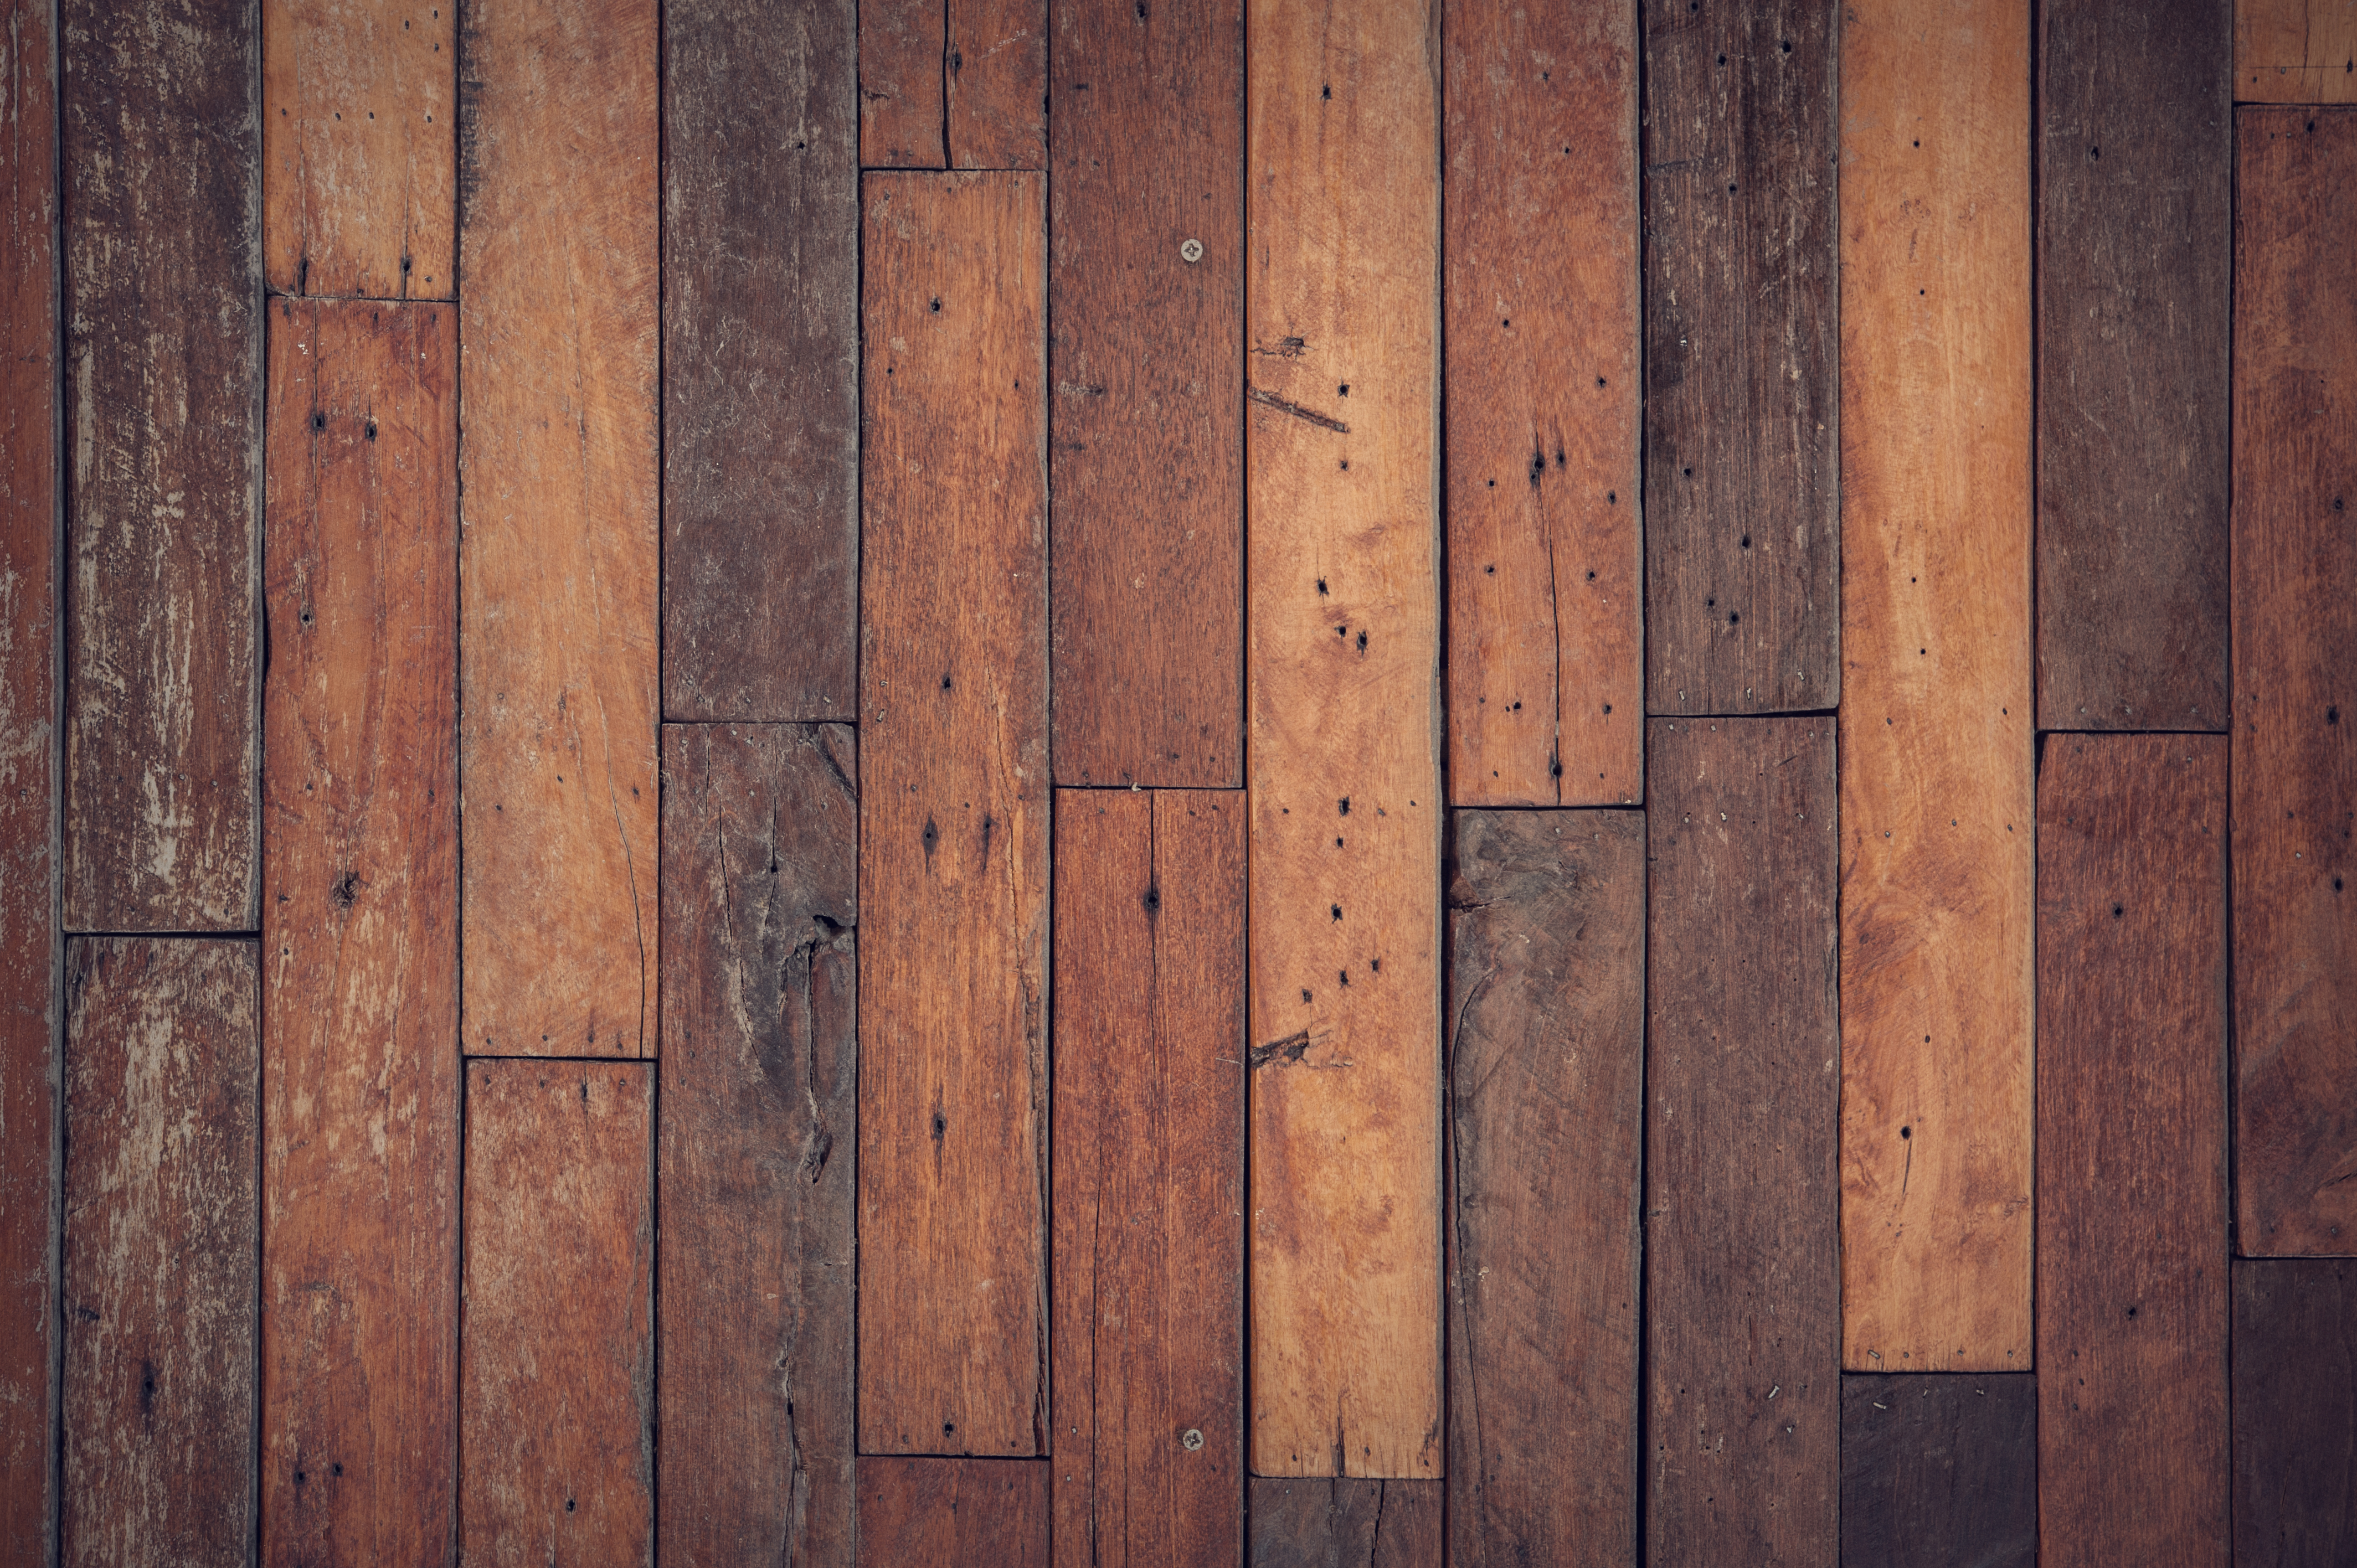 wood flooring is a natural oil finish right for your hardwood floor? via @macwoods CERAIGM